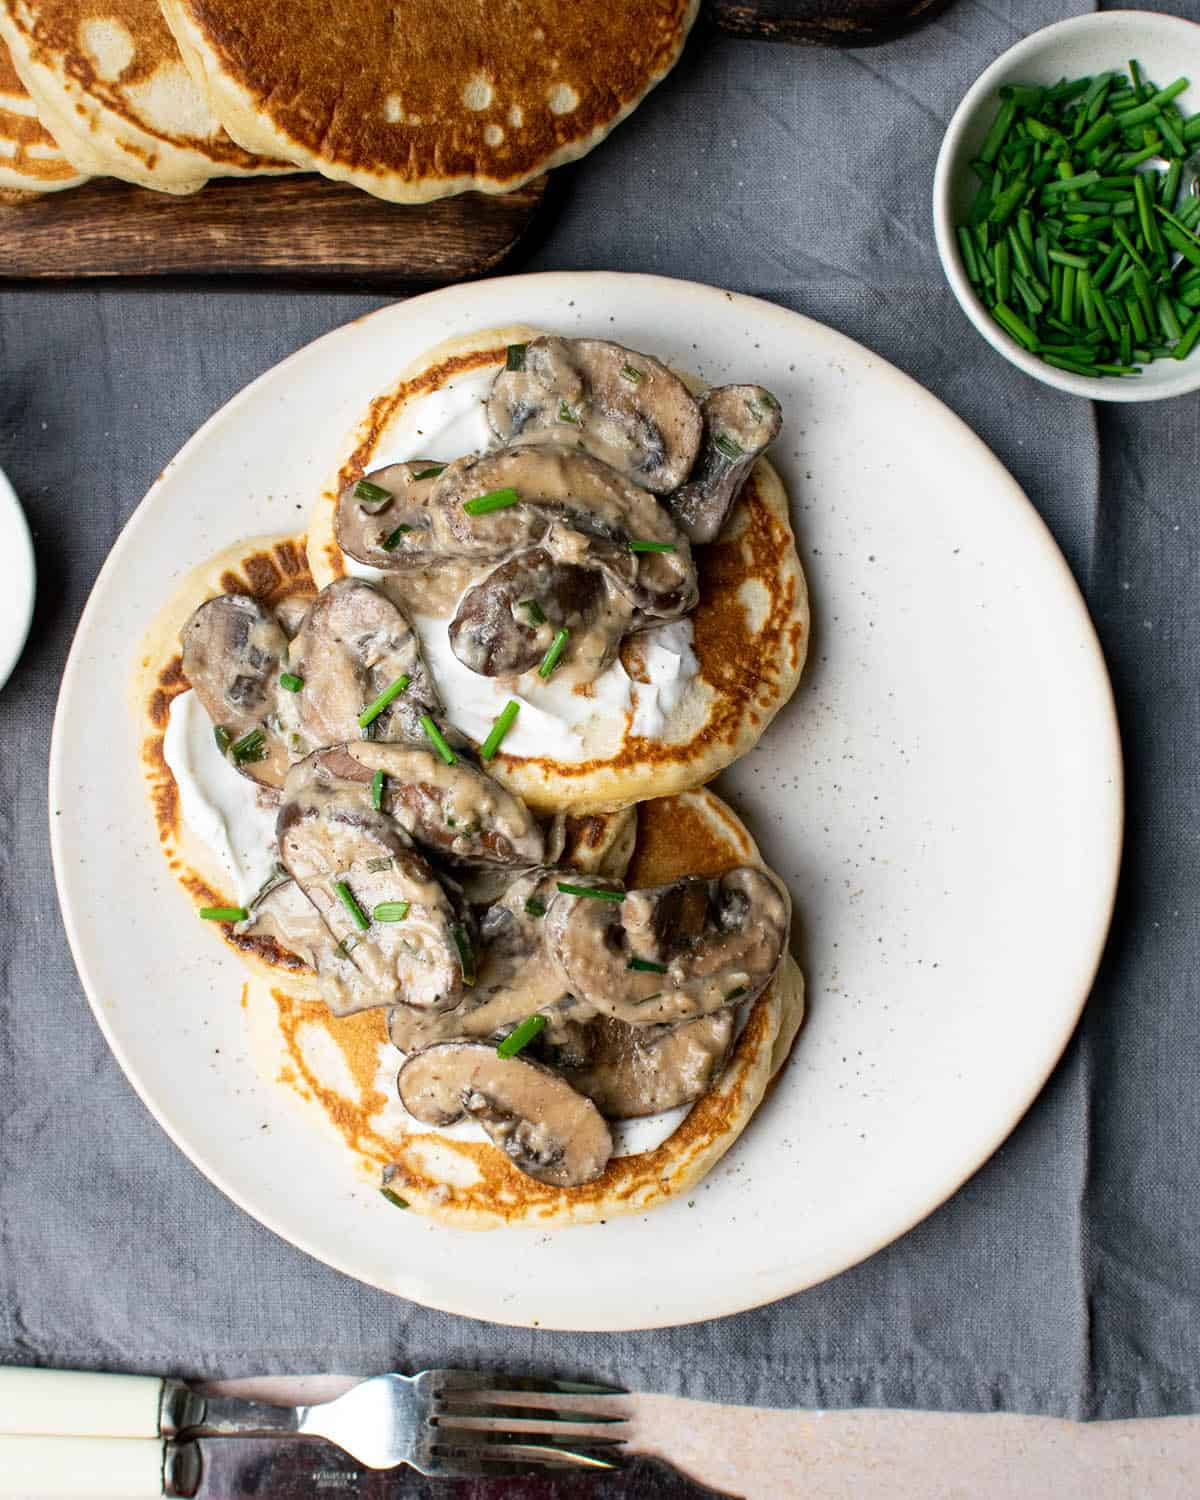 Top down view of vegan savoury pancakes on a plate topped with mushrooms and chives.